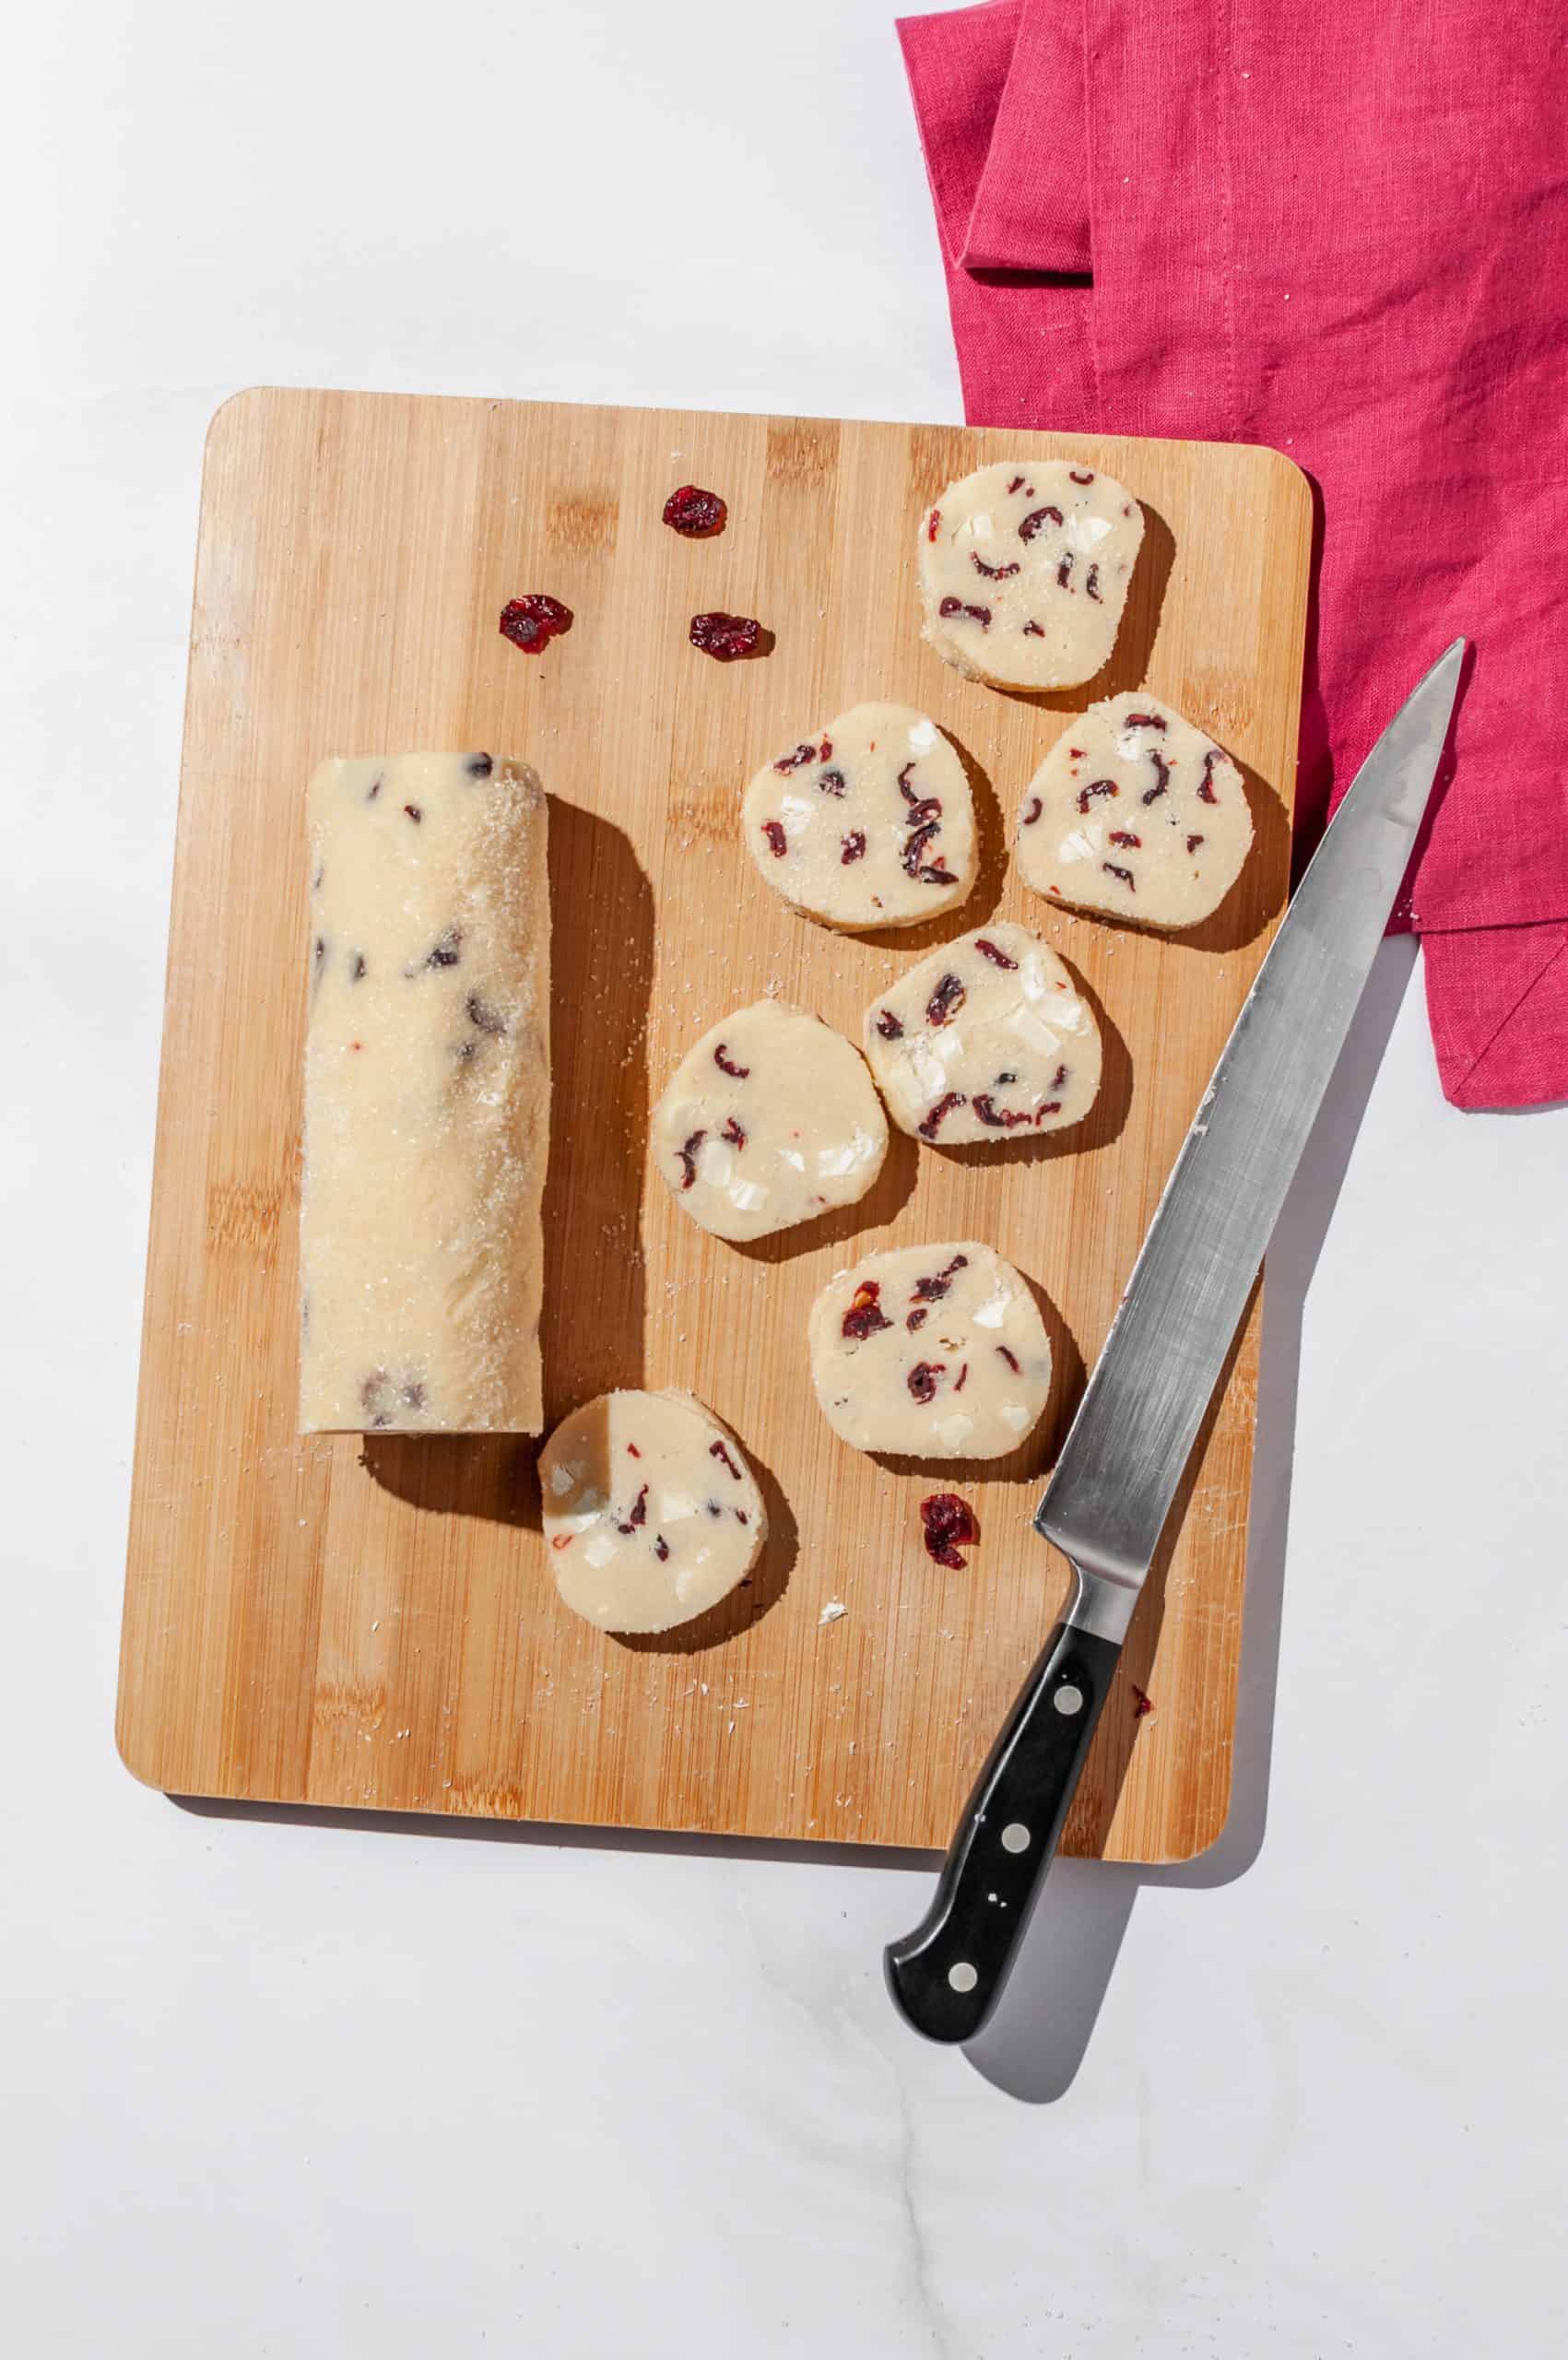 log of cranberry white chocolate shortbread dough sliced into 7 rounds on a cutting board